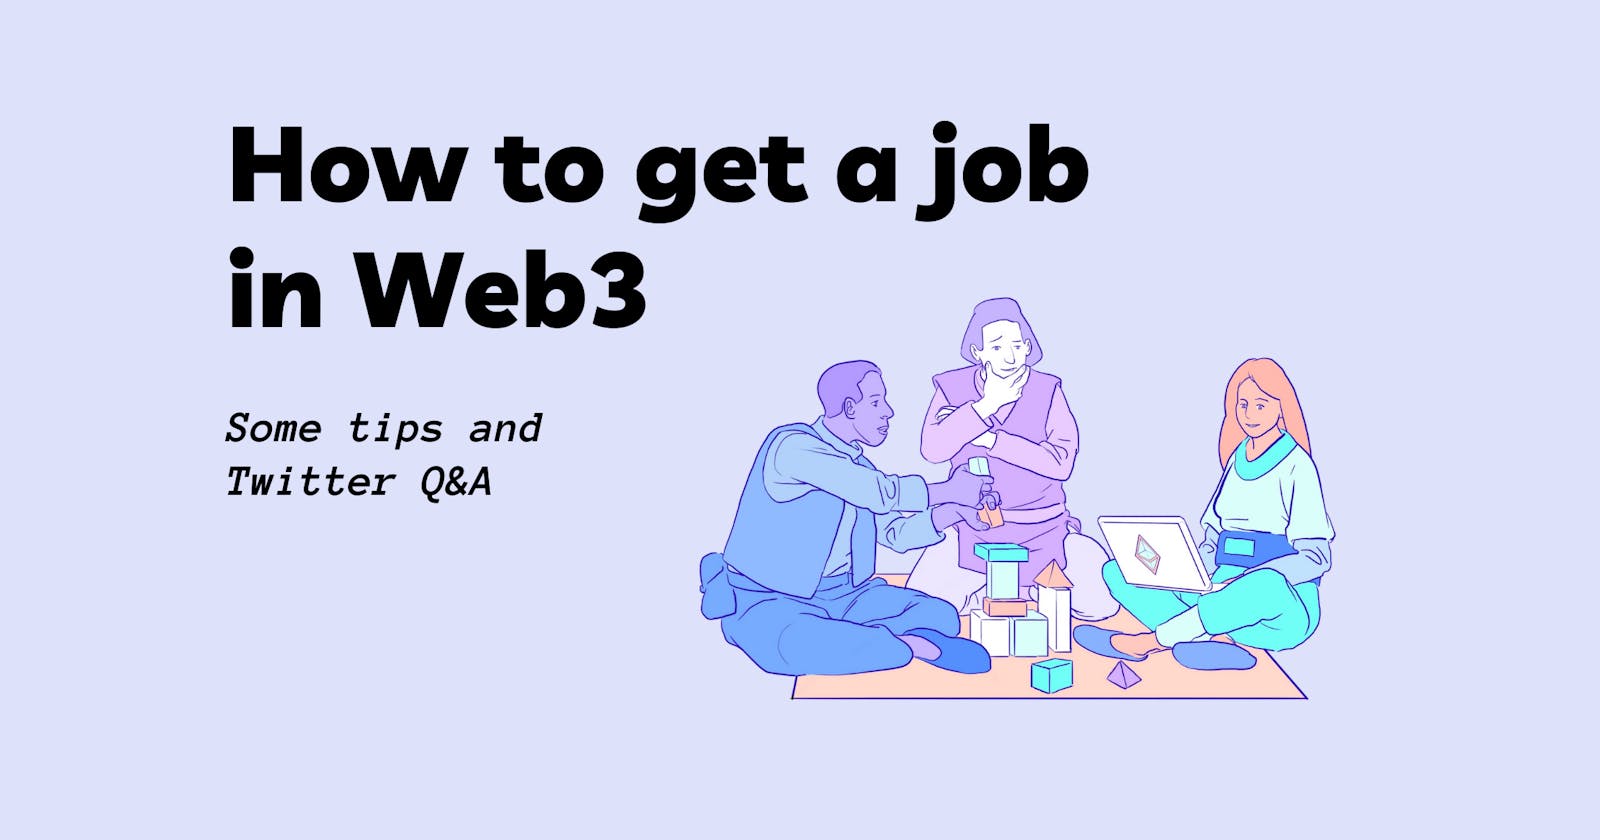 How to get a job in Web3